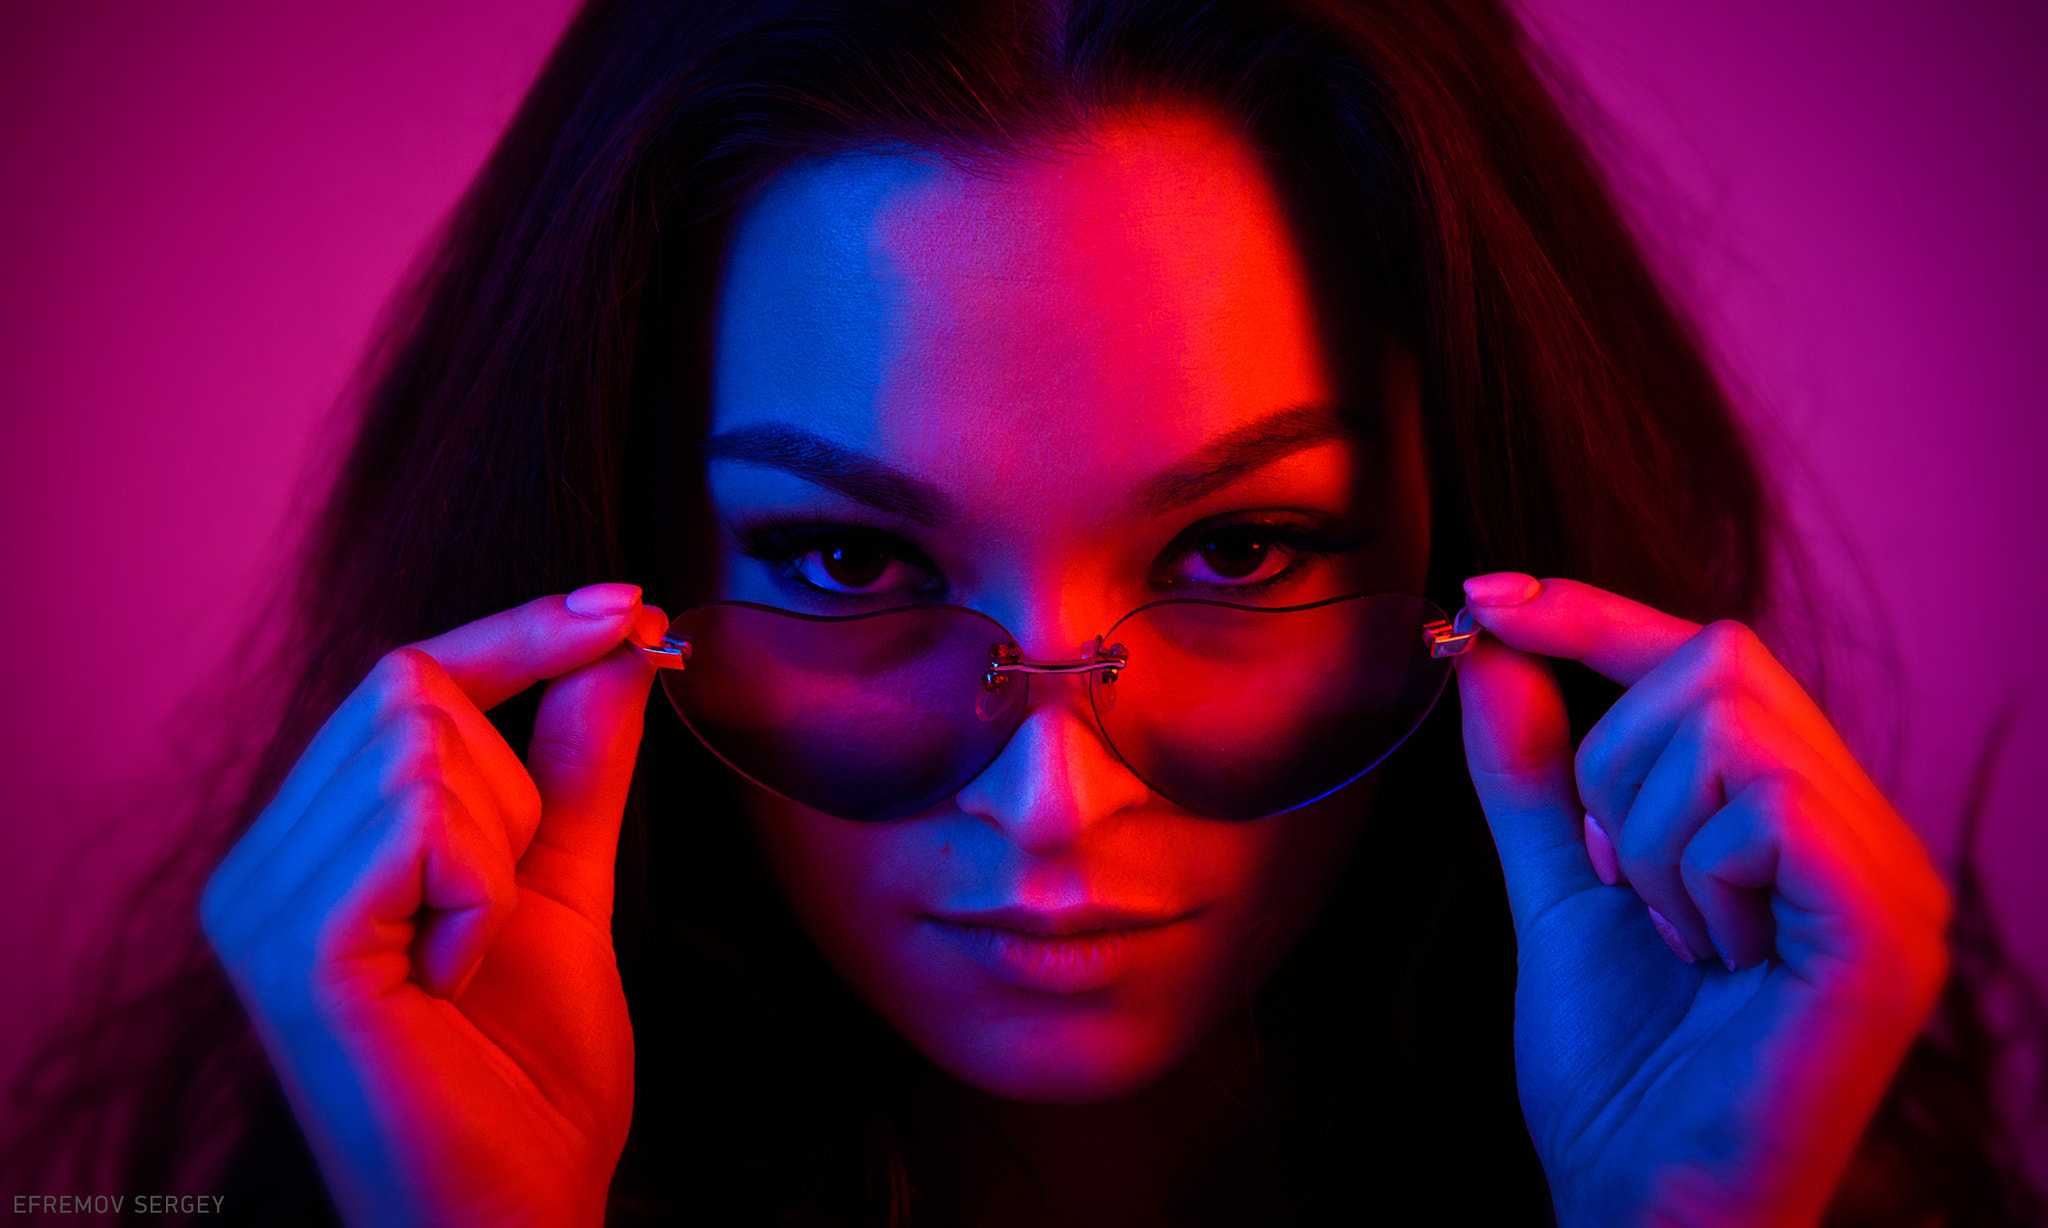 People 2048x1228 women face portrait women with glasses neon Sergey Efremov touching glasses red purple watermarked low light closeup